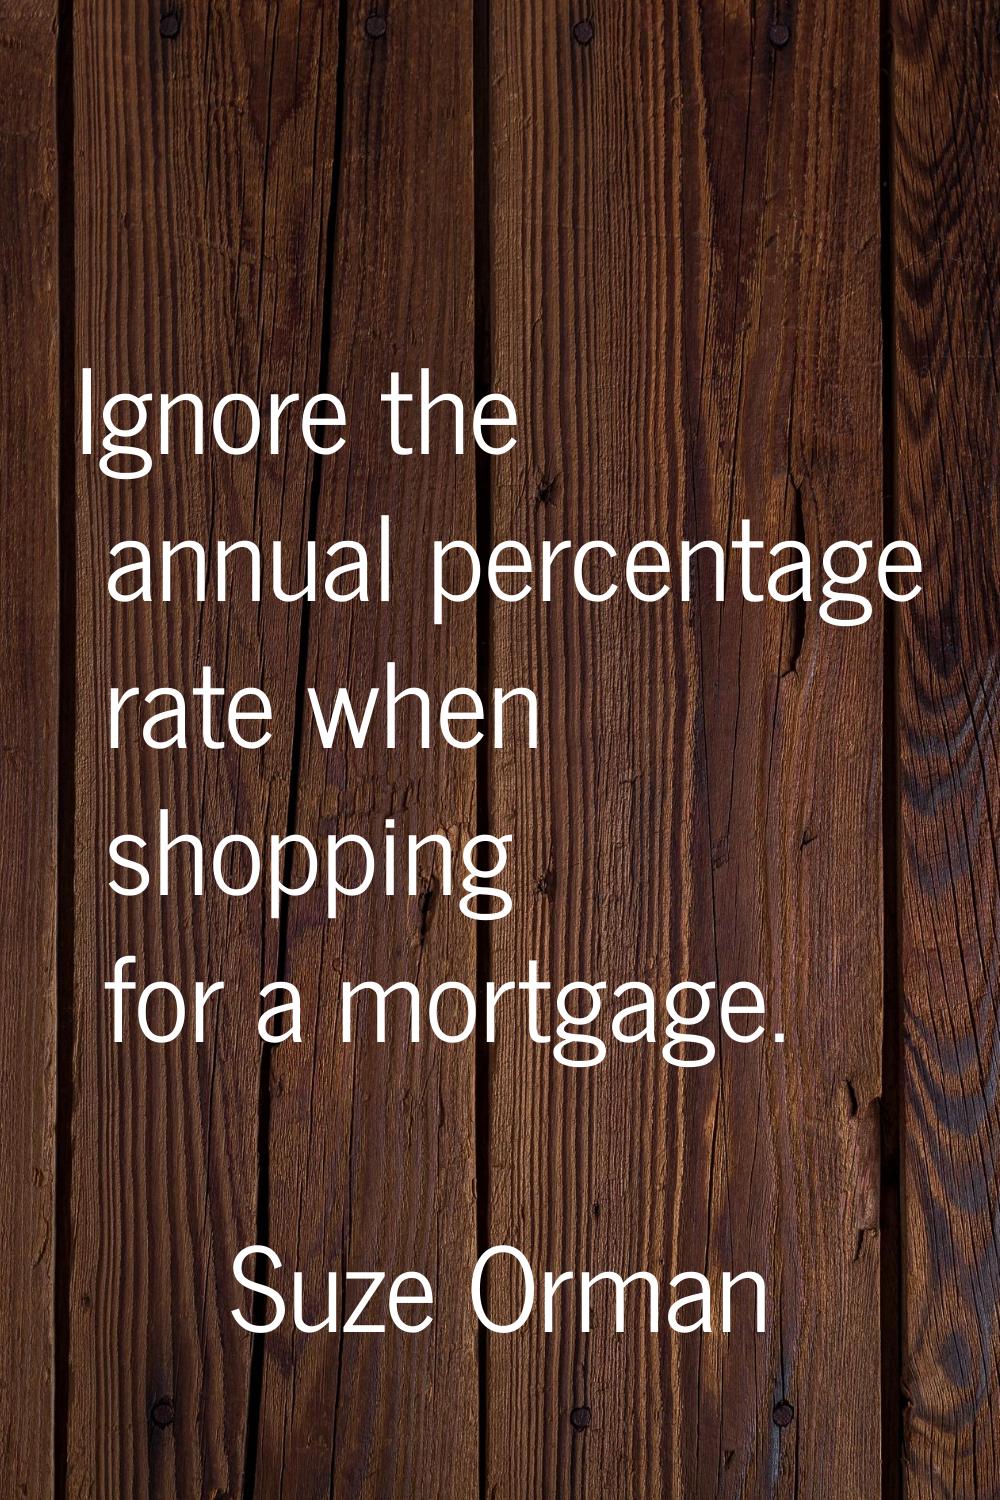 Ignore the annual percentage rate when shopping for a mortgage.